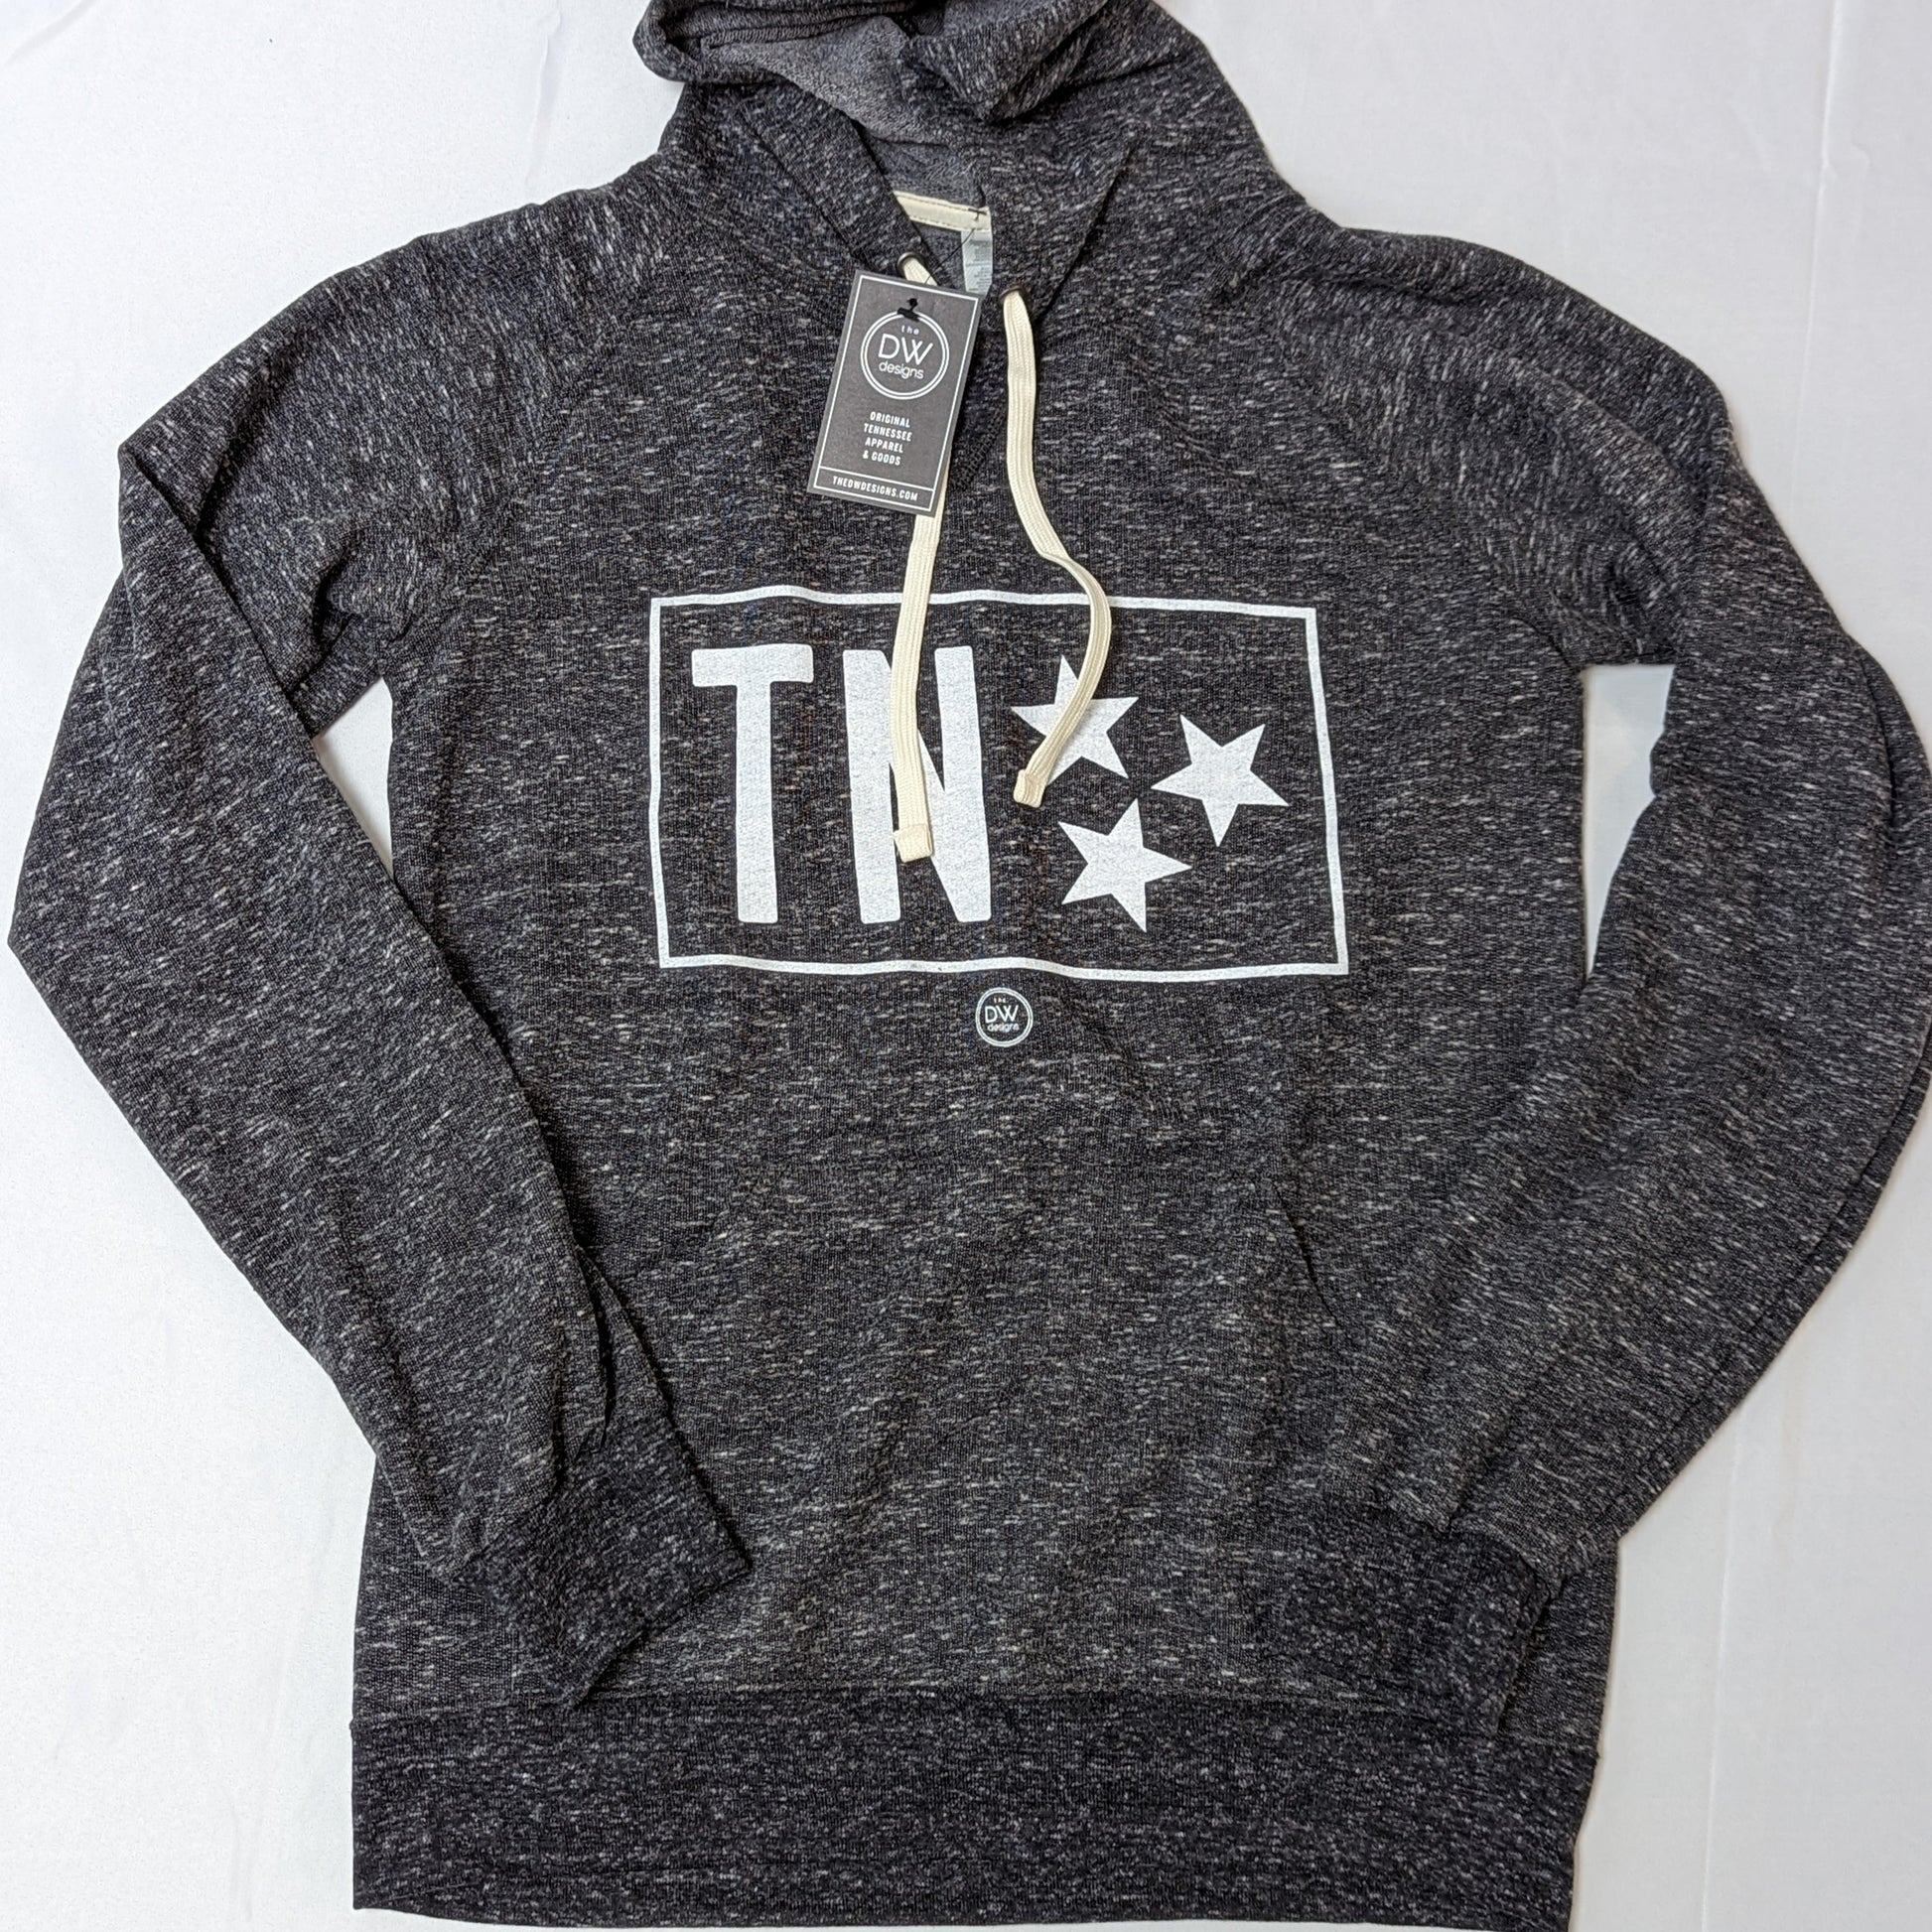 The TN Stars Hoodie features the abbreviation TN next to the three Tennessee stars. Sold by The DW Designs, Knoxville, TN.